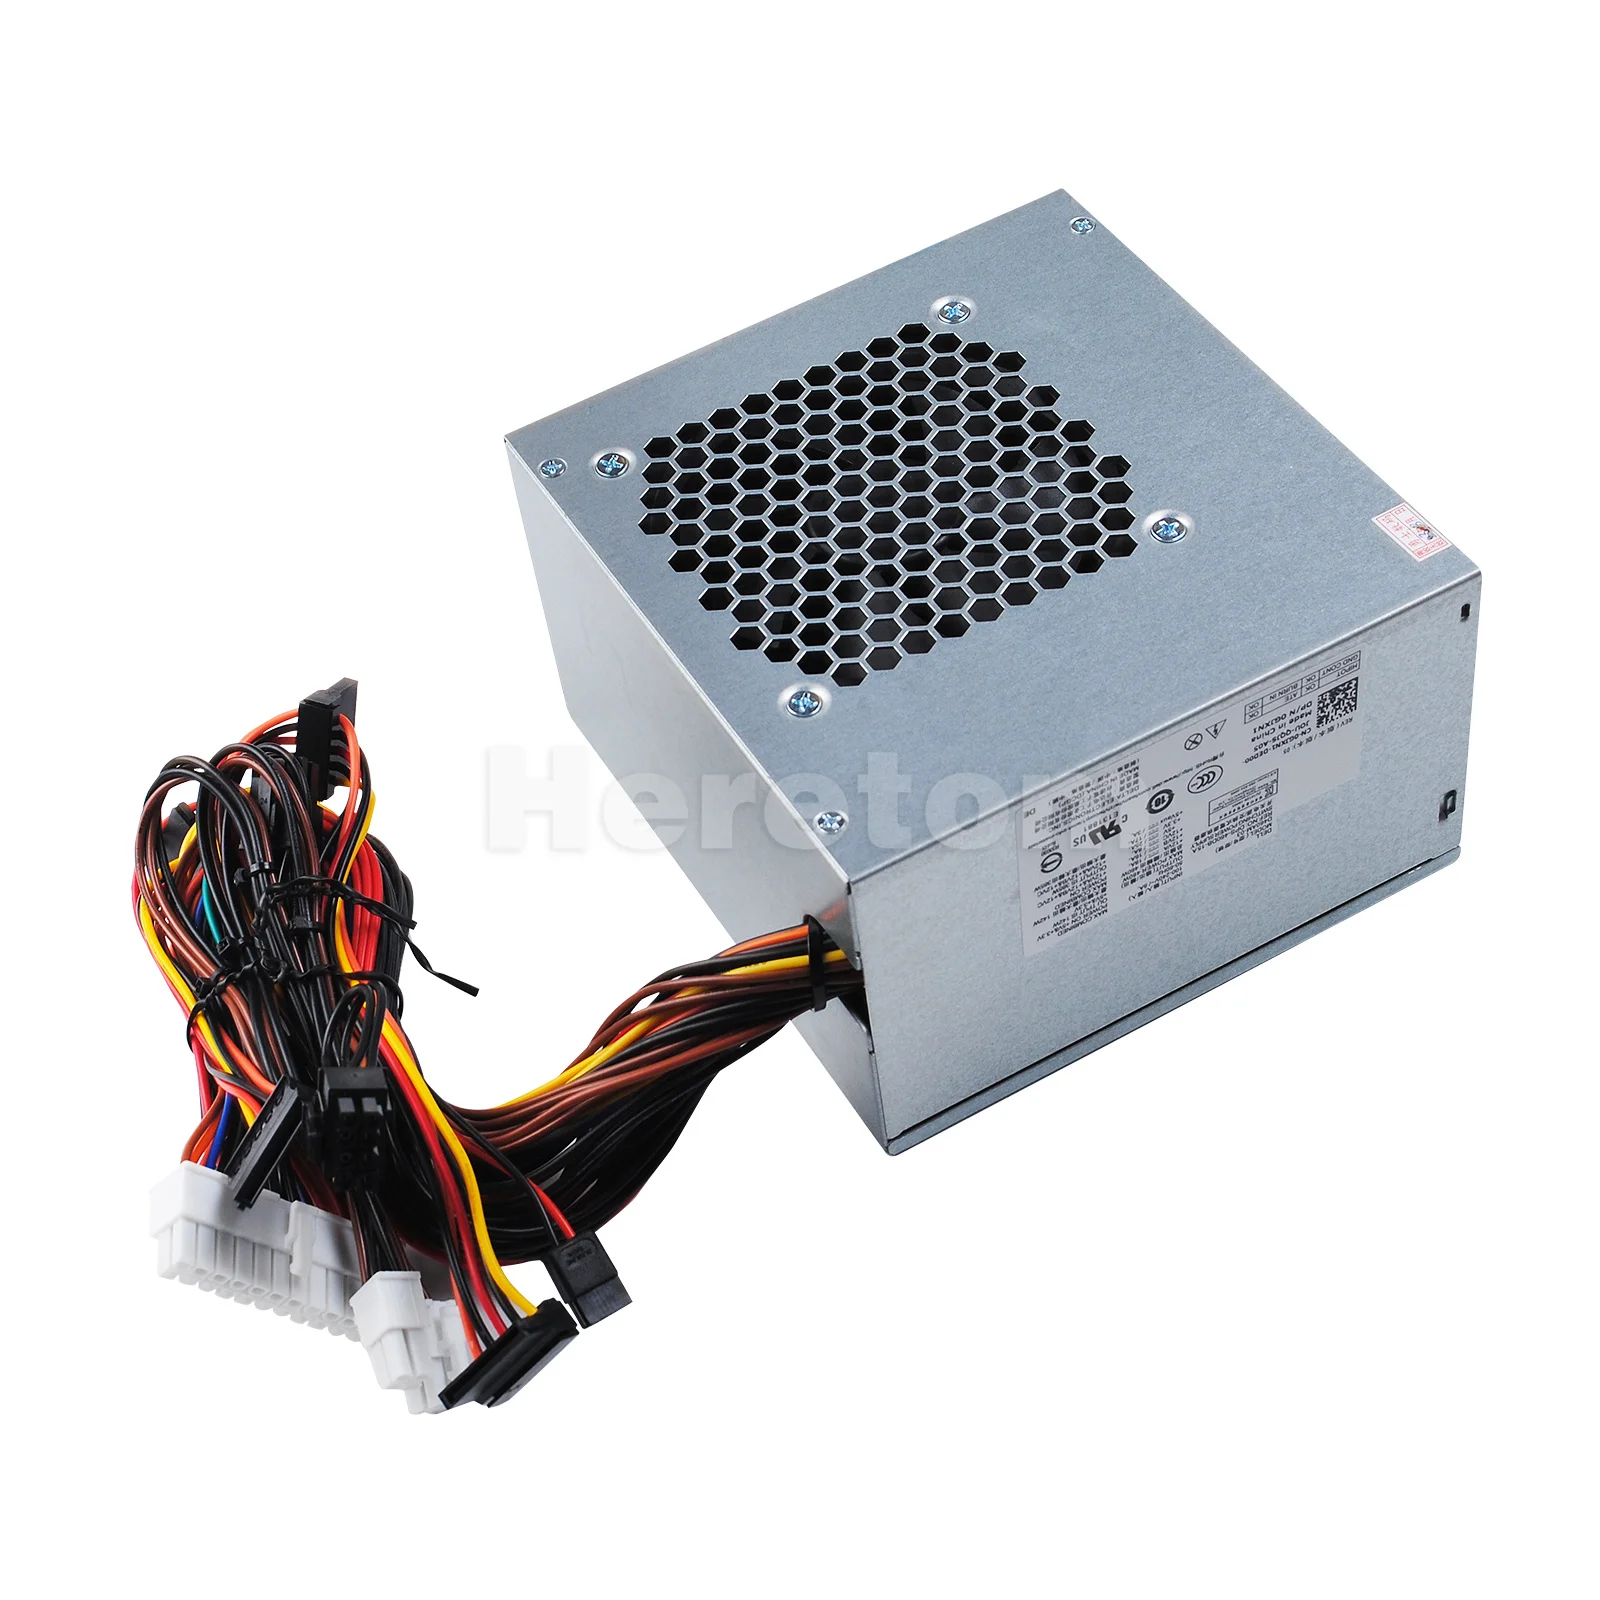 

New 460W Power Supply For Dell XPS 8000 D460AM-03 AC460AD-01 HU460AD-01 H460AD-00 HU460AM-01 GJXN1 FVGCW RH8P5 7P3WV